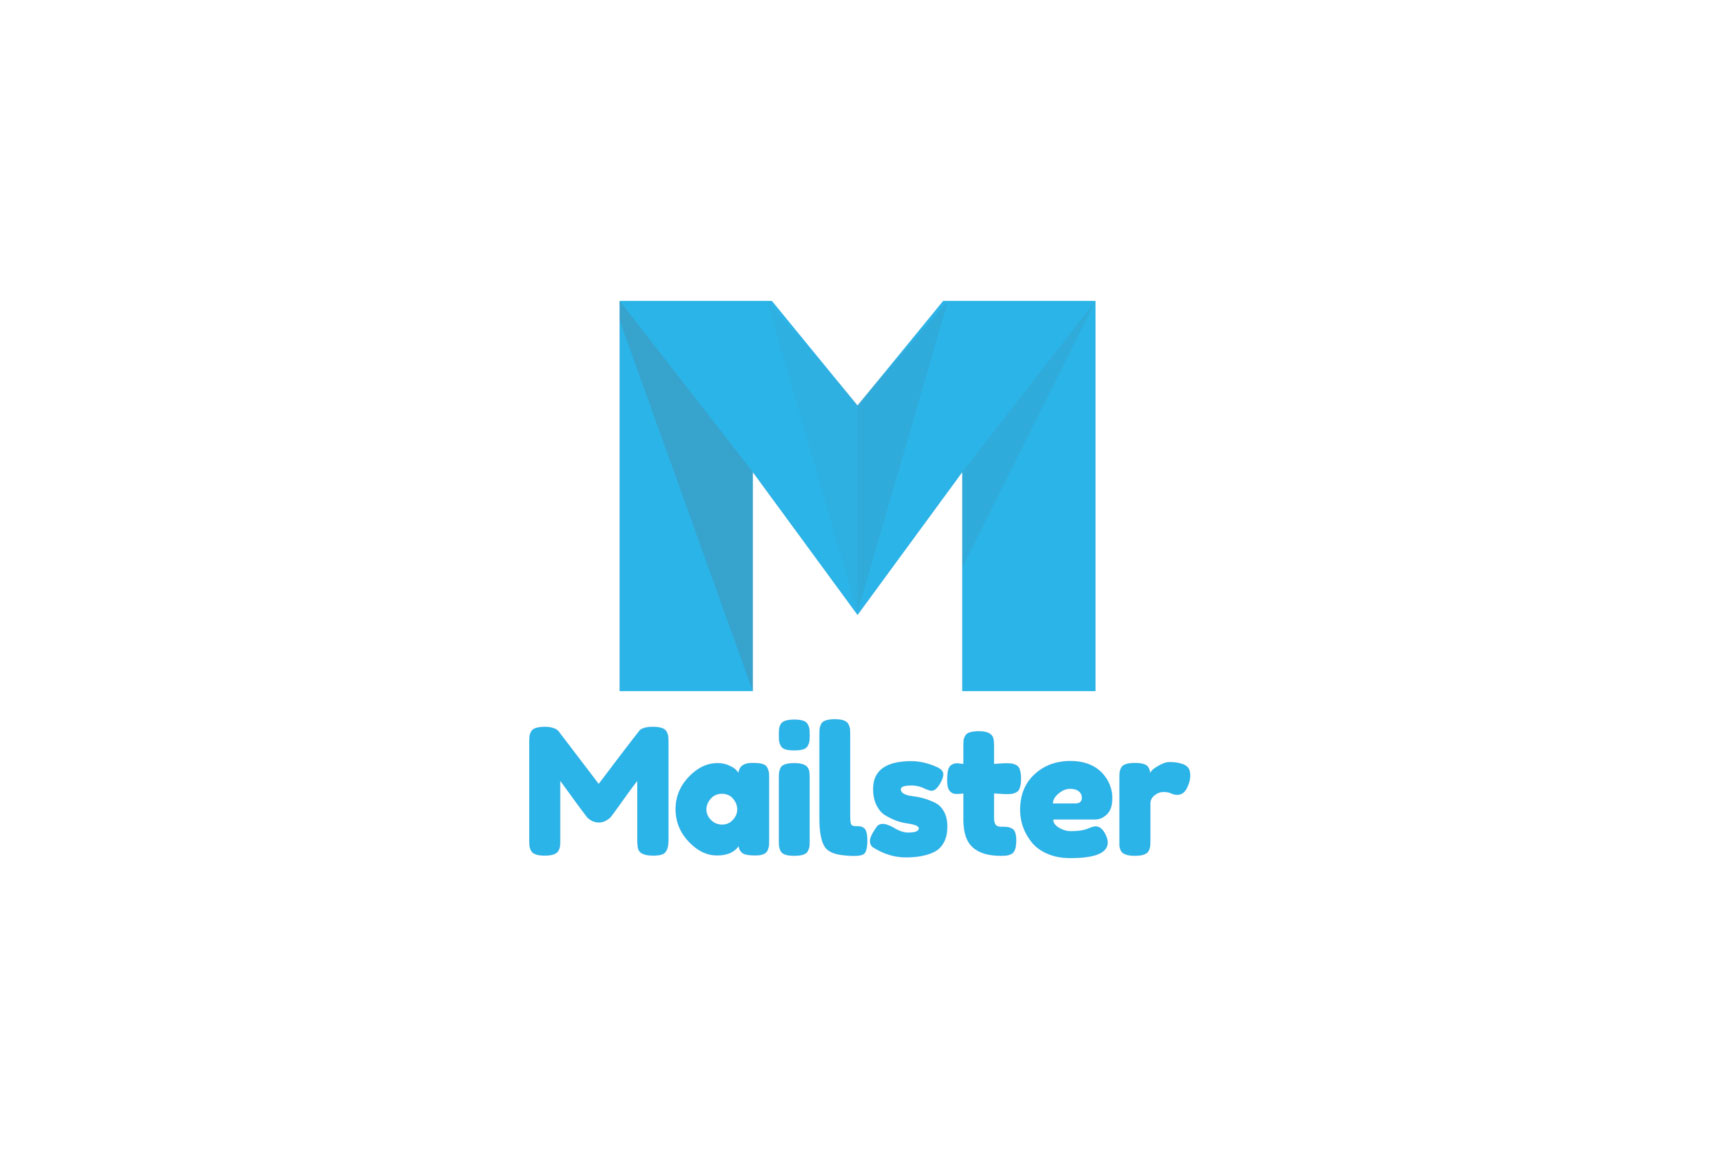 Mailster masthead image